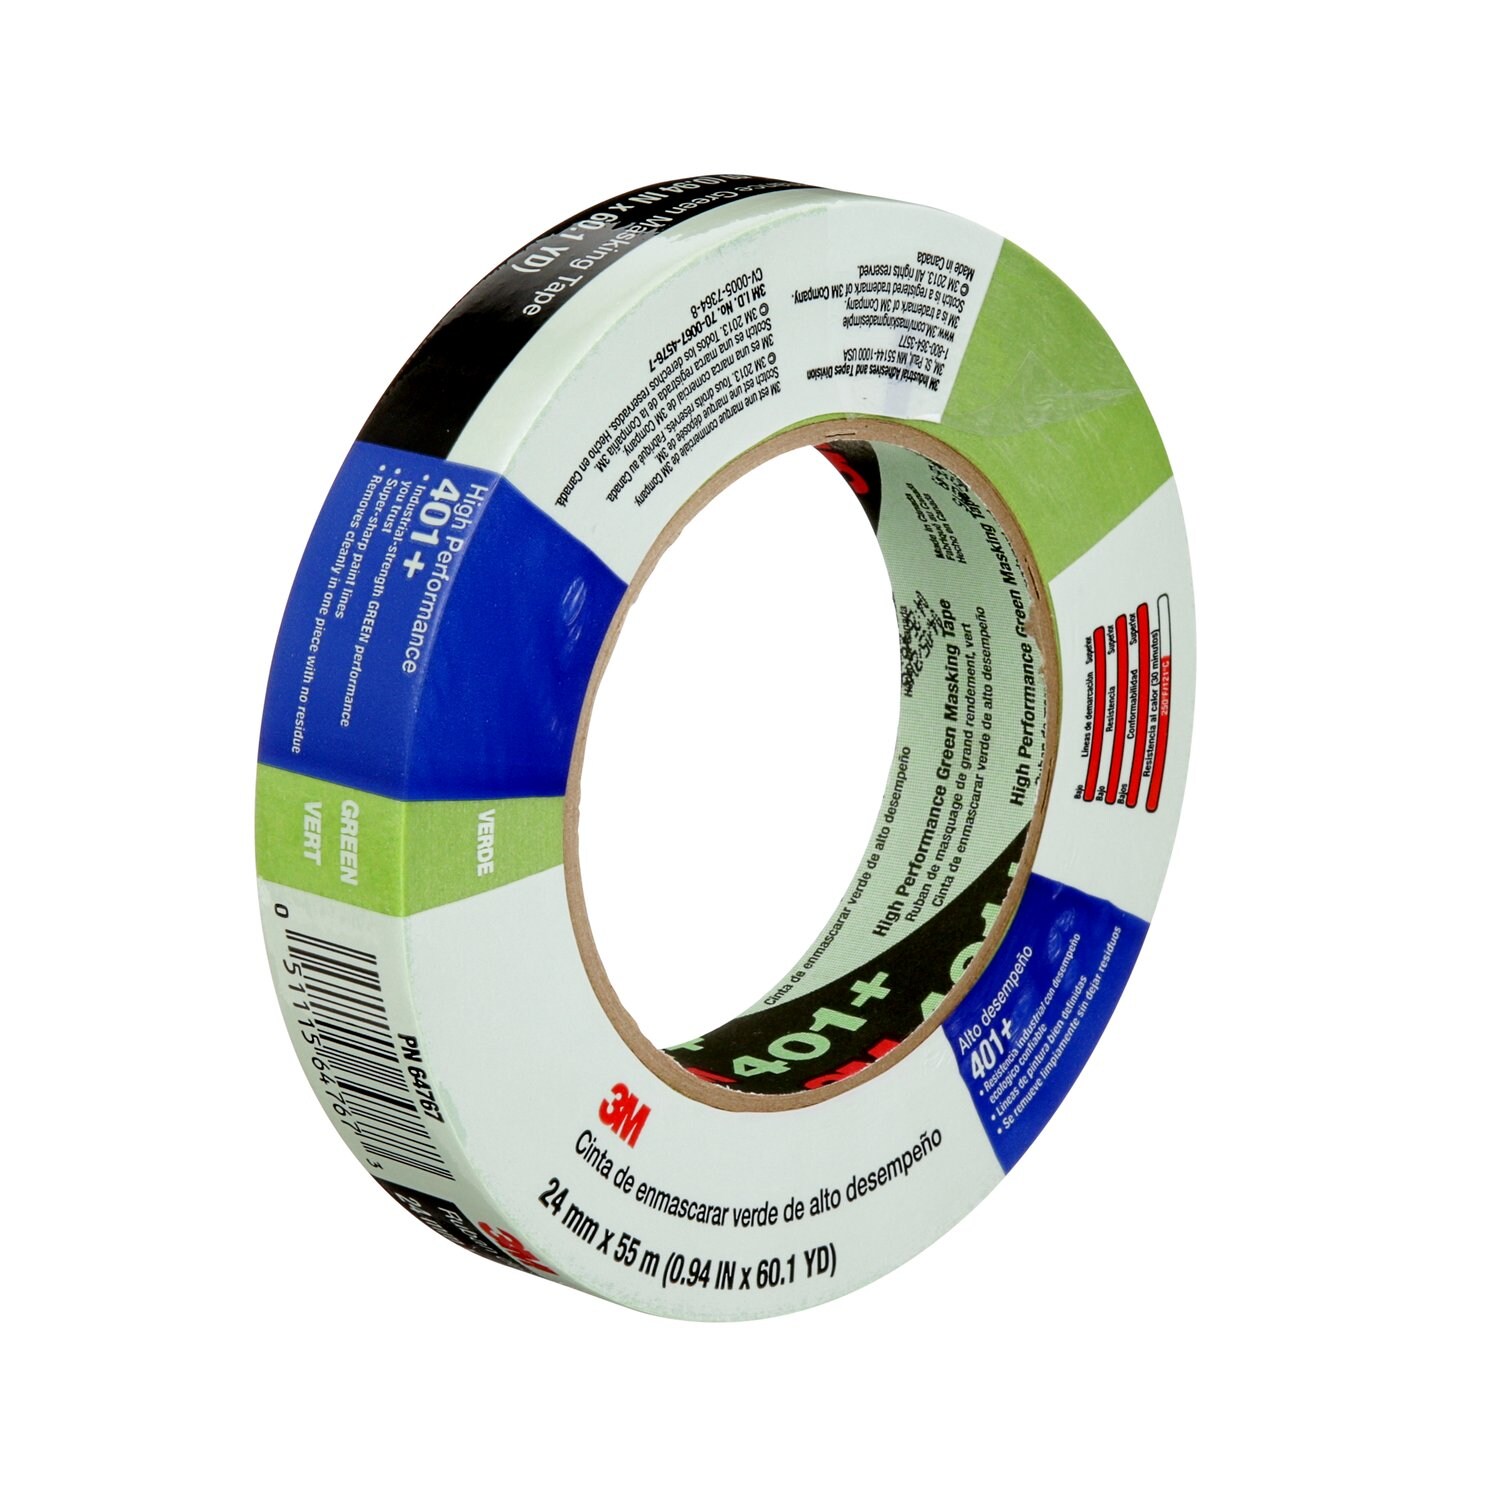 7000148422 - 3M High Performance Green Masking Tape 401+, 24 mm x 55 m, 24
Roll/Case, Individually Wrapped Conveniently Packaged